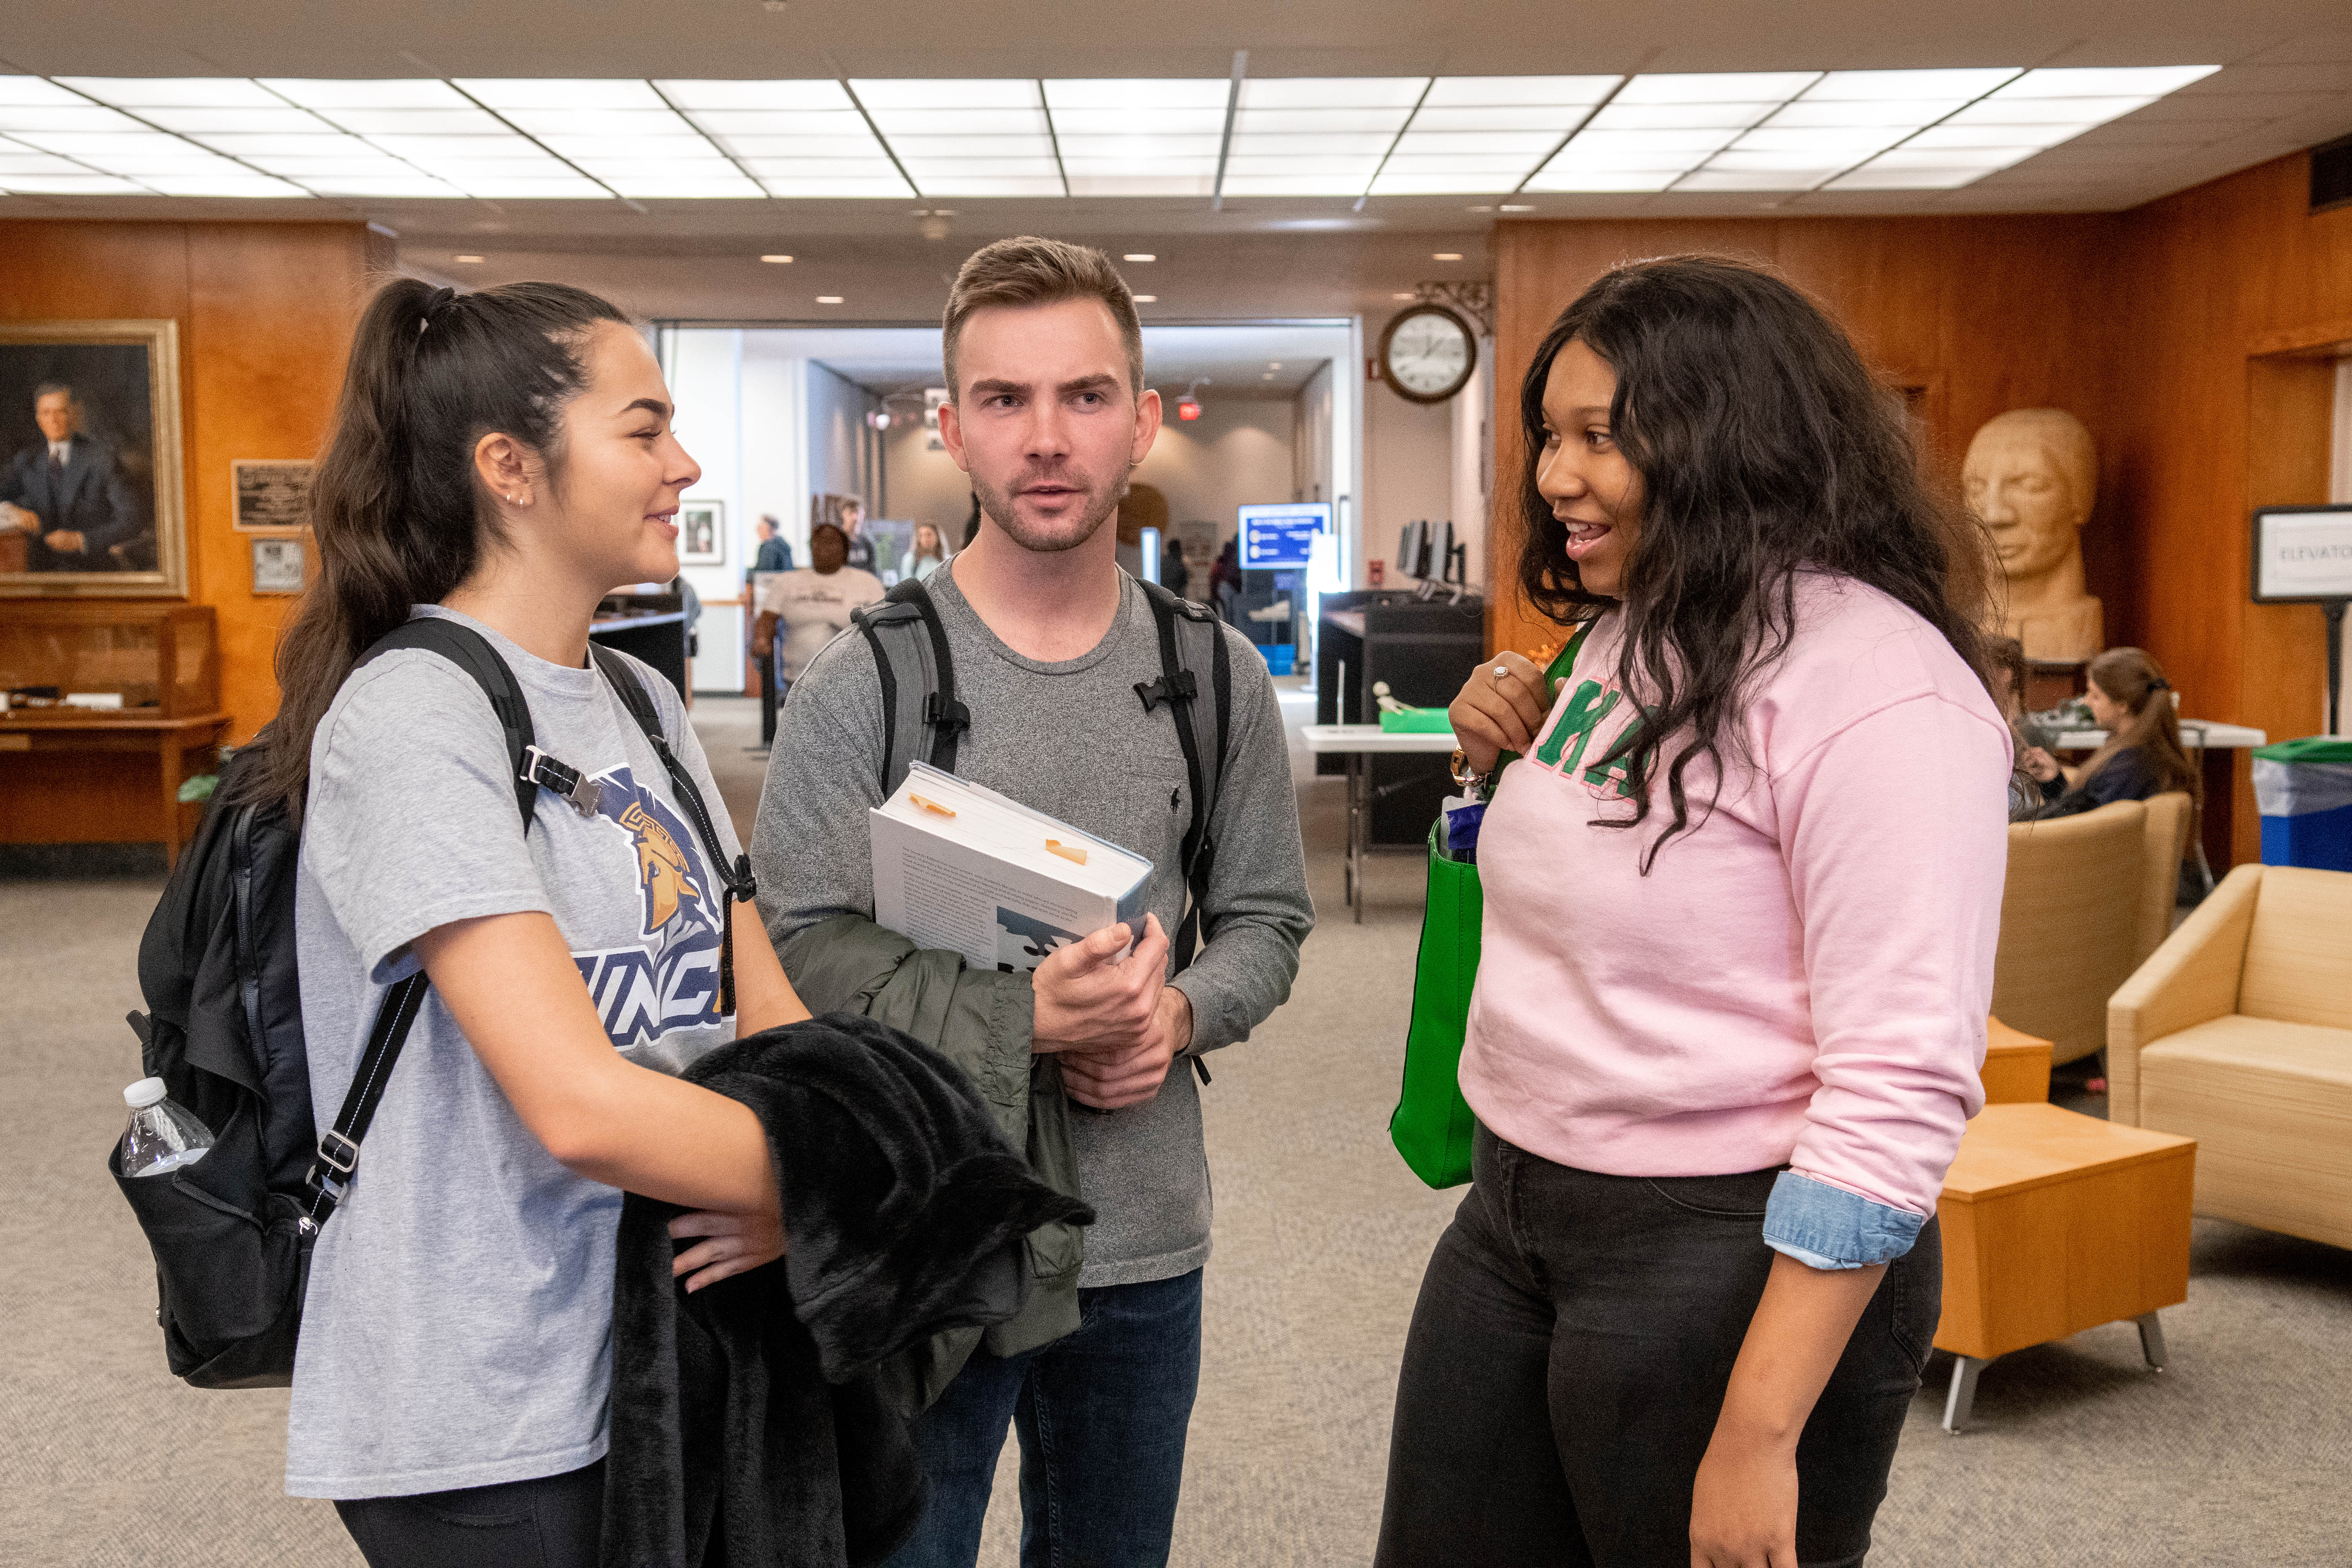 Students conversing in the Jackson Library.